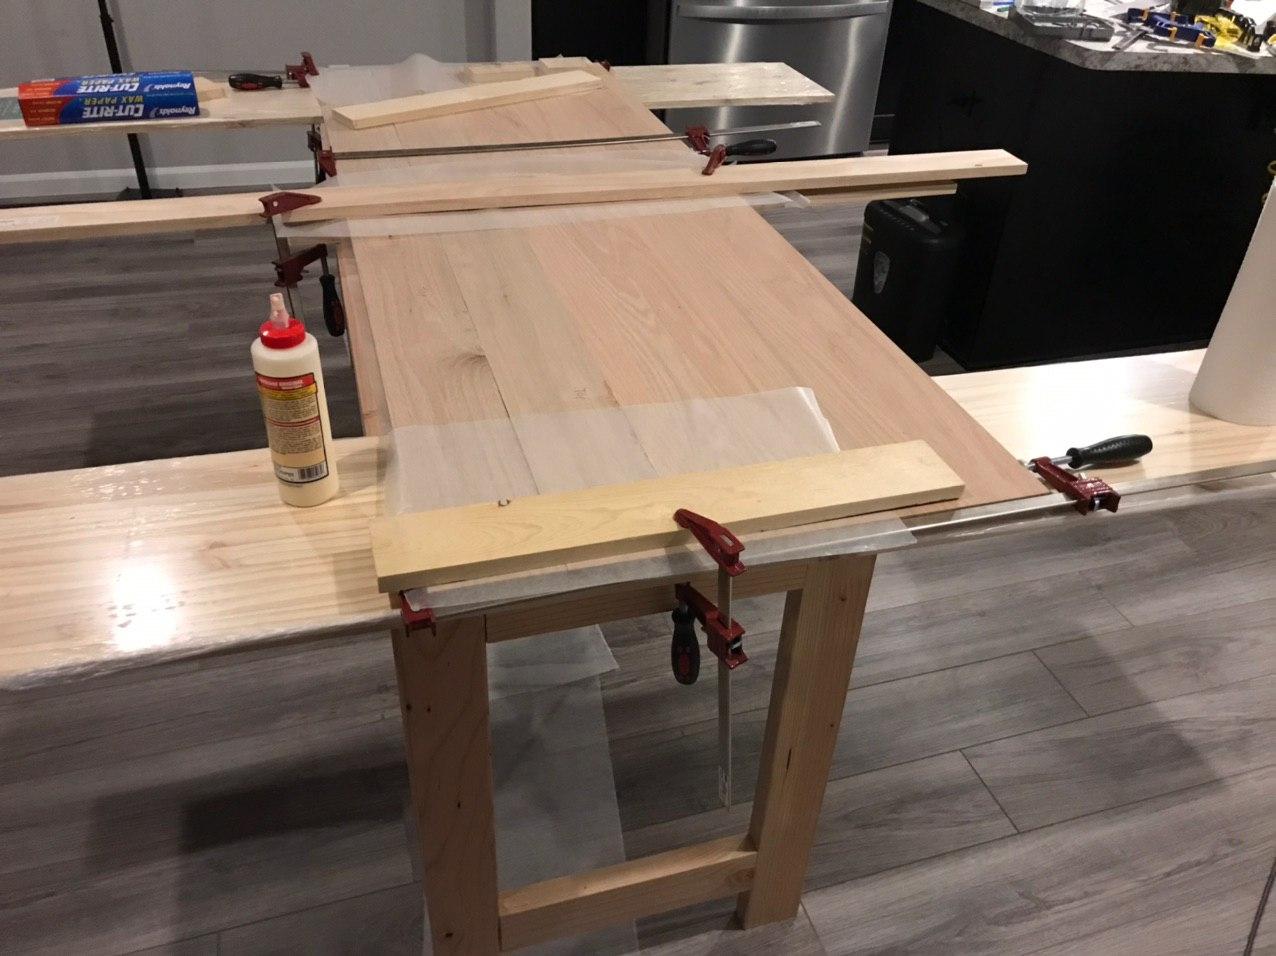 Clamps and wood glue to join planks of wood